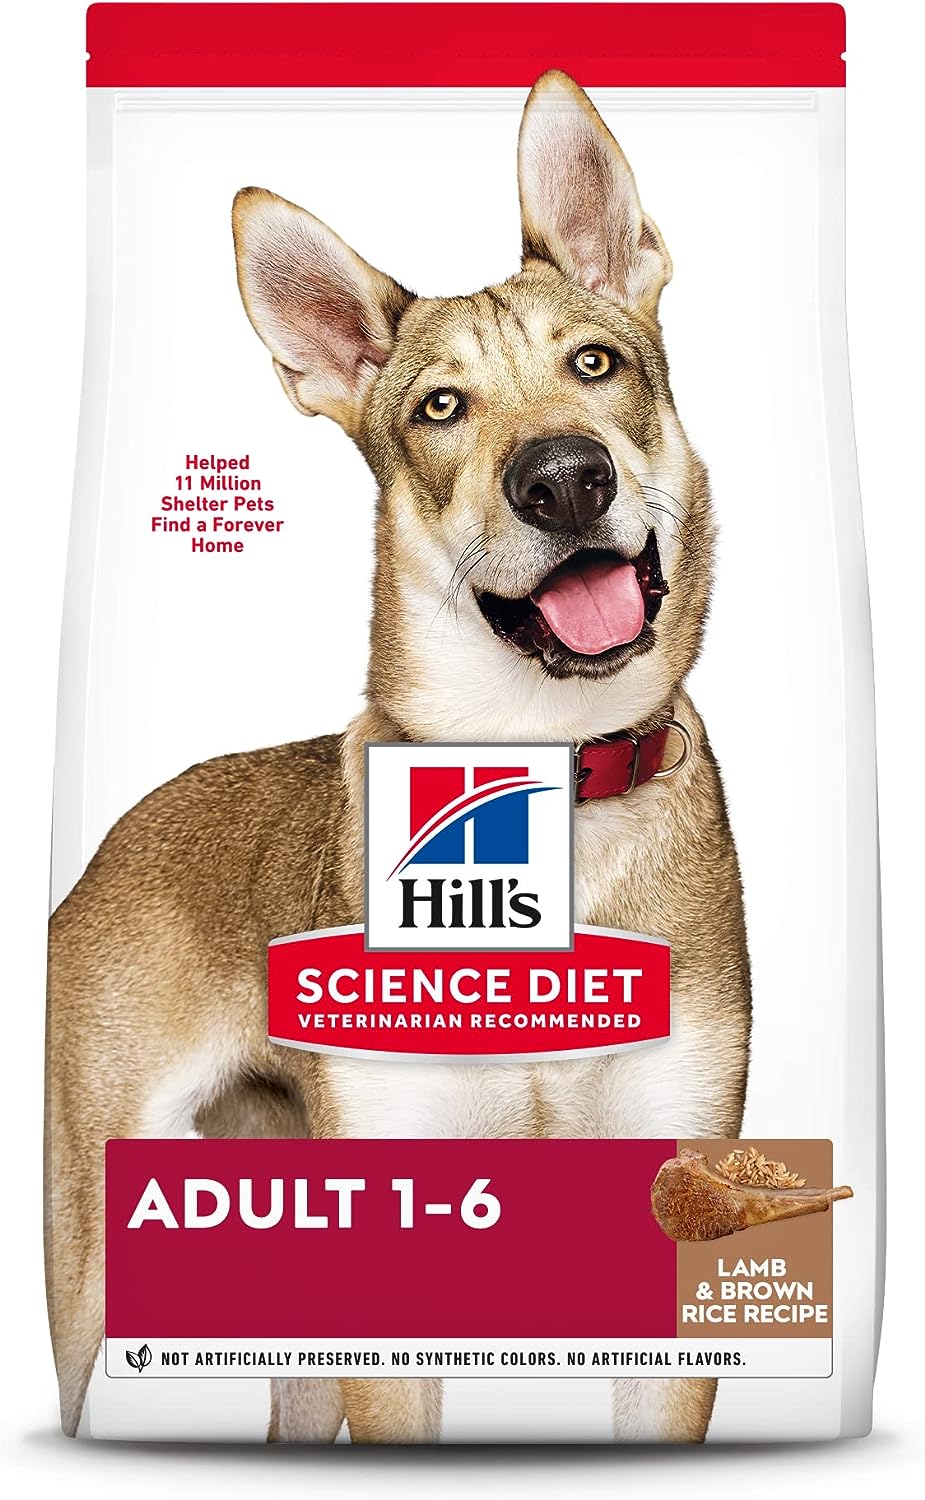 Hill’s Science Diet Adult 1-6 Lamb Meal & Brown Rice Recipe Dry Dog Food – Gallery Image 1